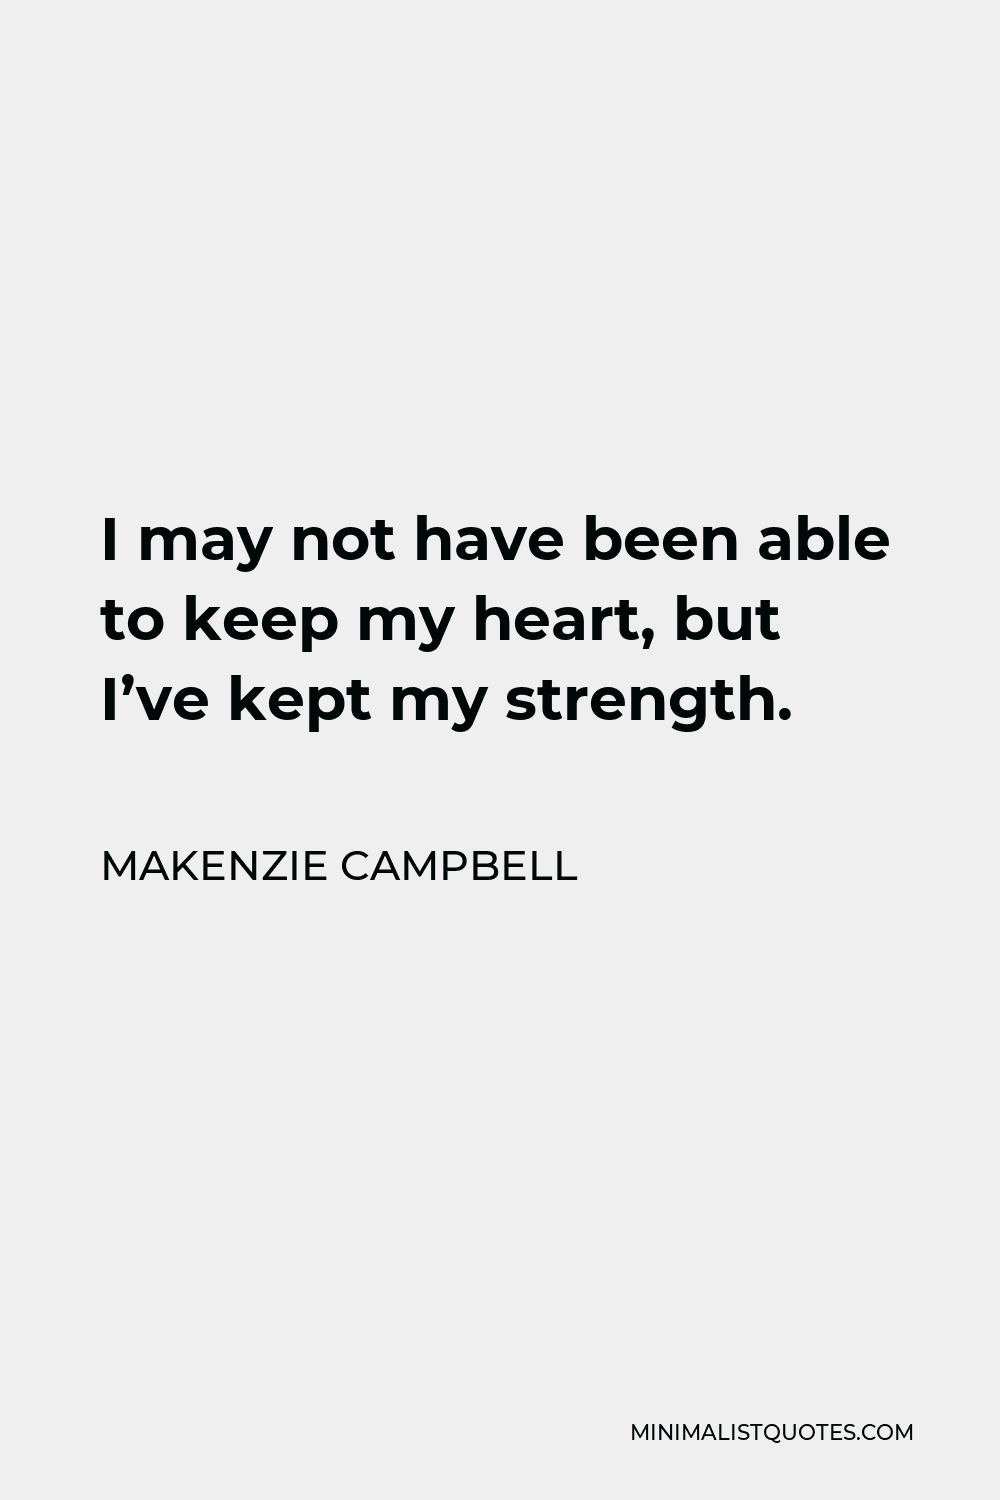 Makenzie Campbell Quote - I may not have been able to keep my heart, but I’ve kept my strength.